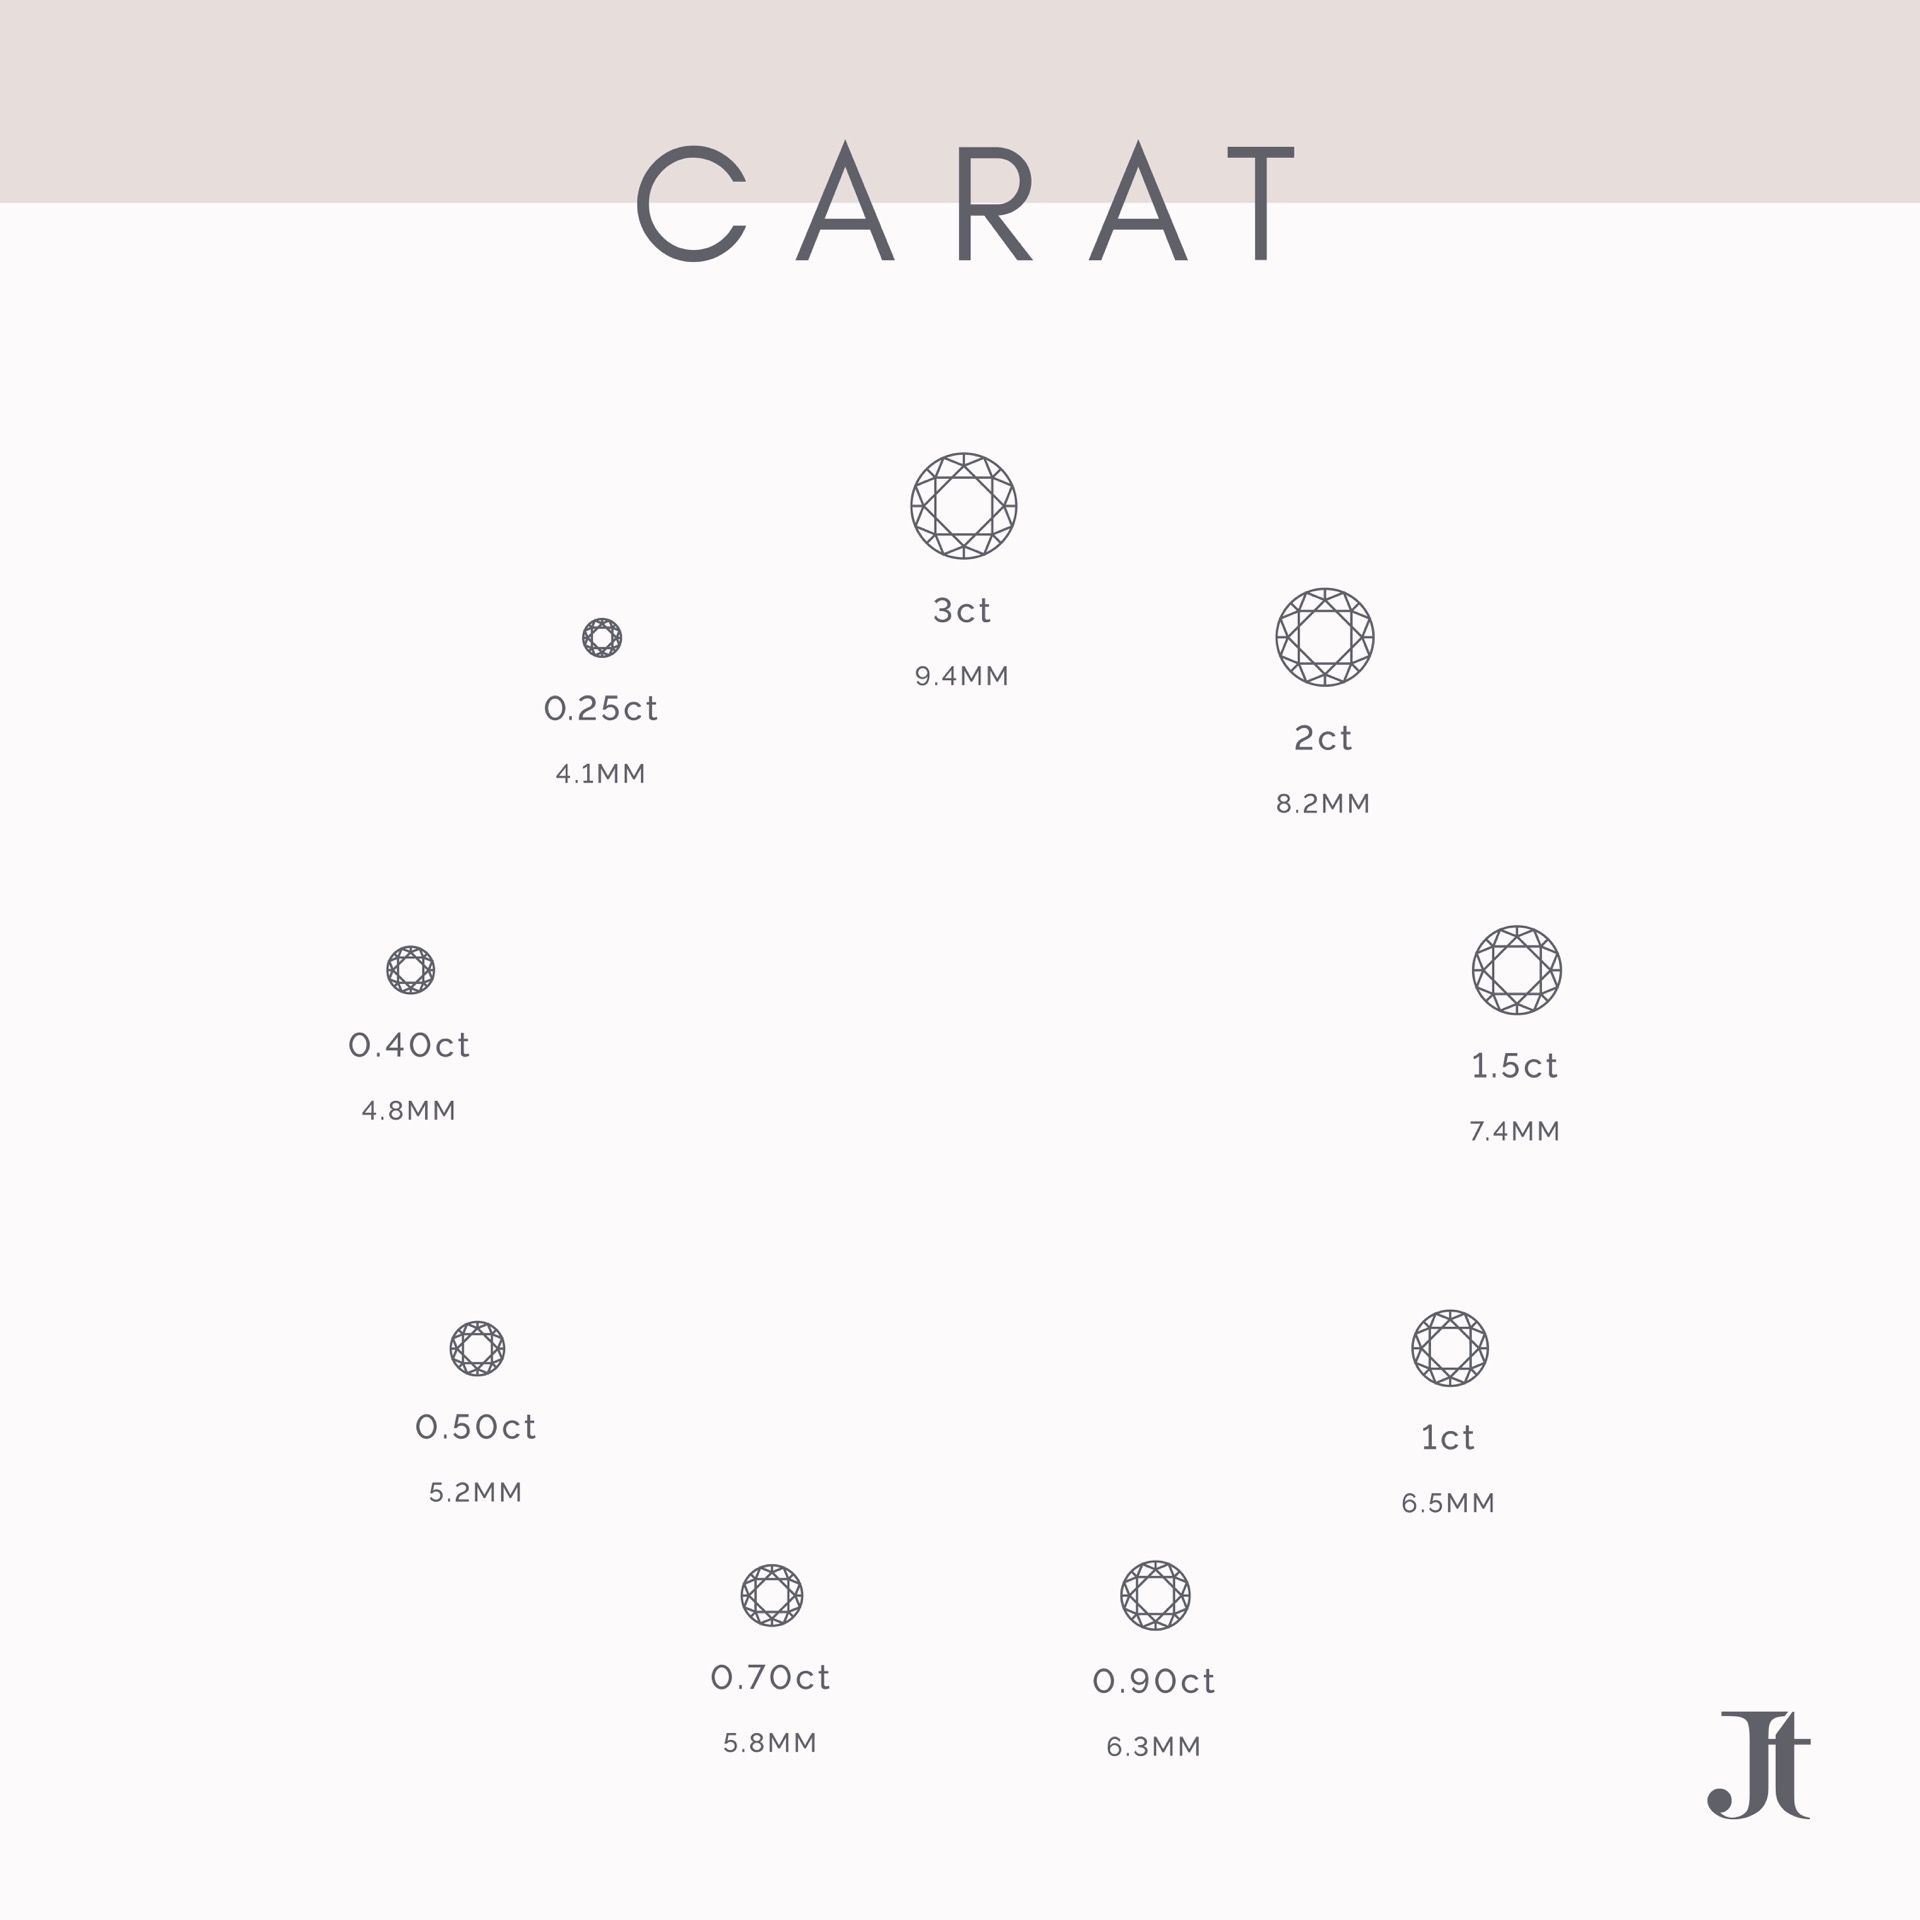 Bristol Jeweller Jacks Turner's Illustration Of The Diamond Four C's, Showing The Diamond Carat Sizes That Can Be Used In Her Engagement Rings.